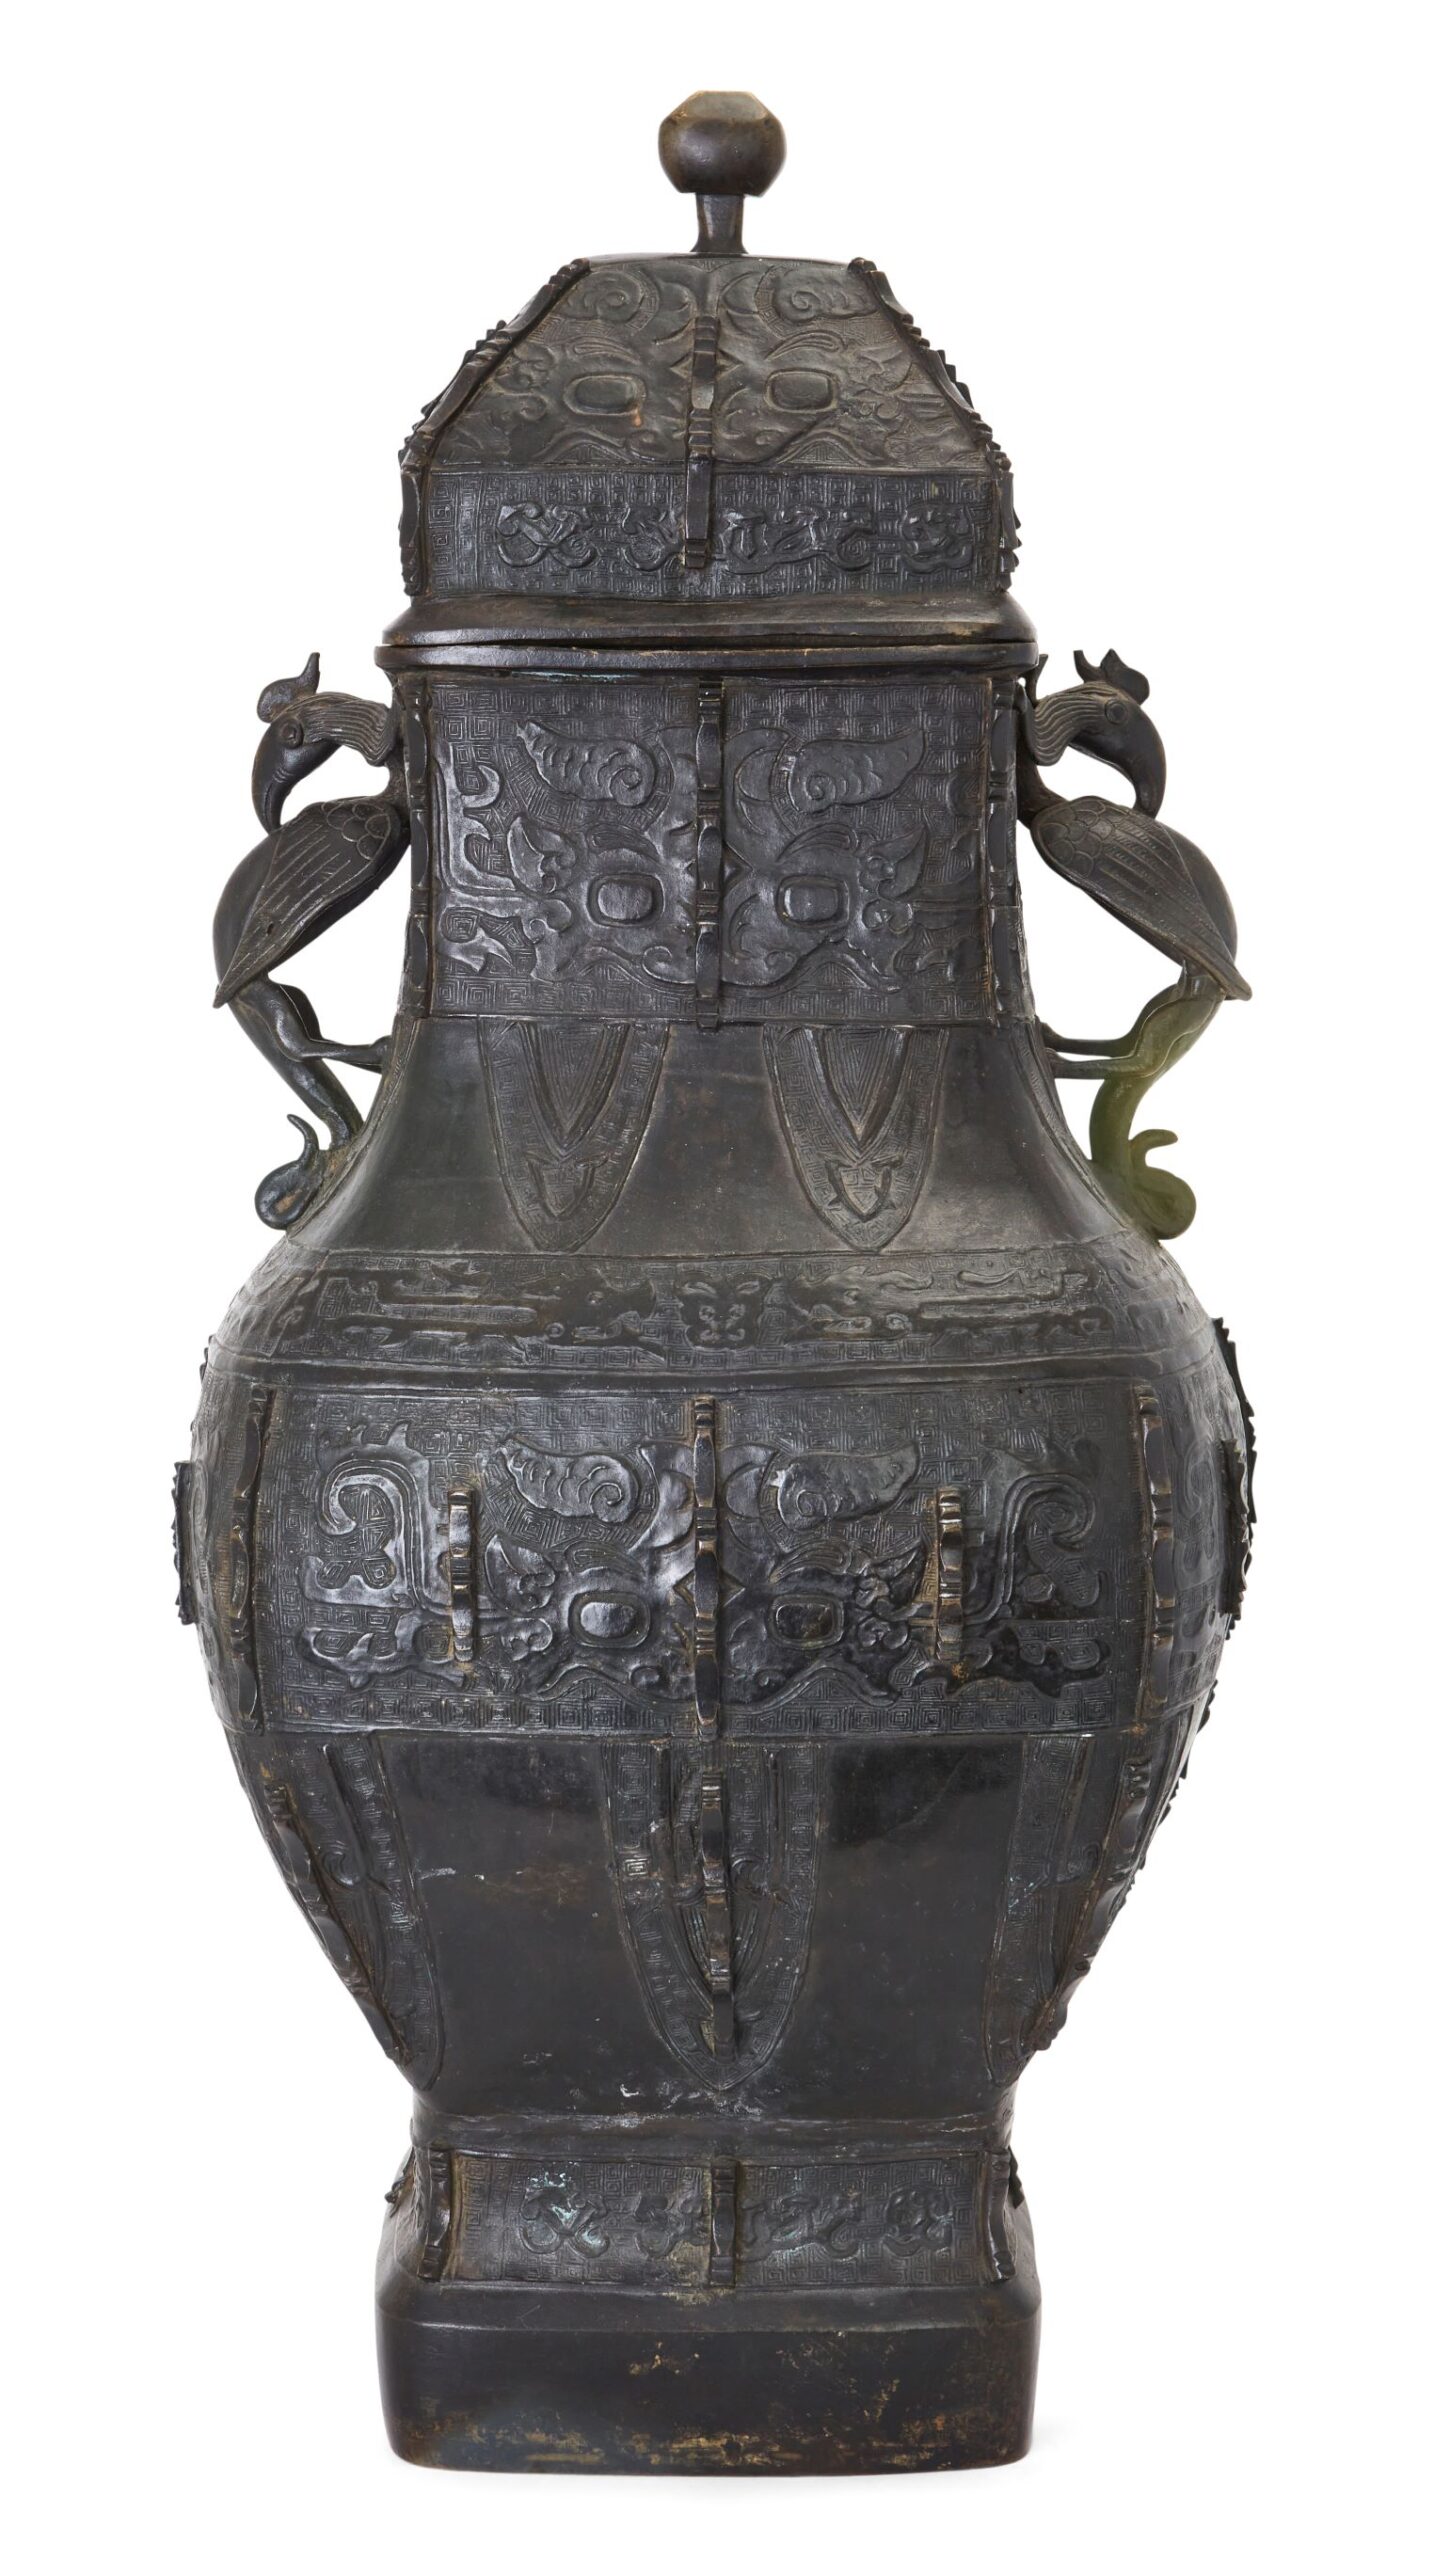 A massive Chinese bronze archaistic vase and cover, fanghu, 17th century